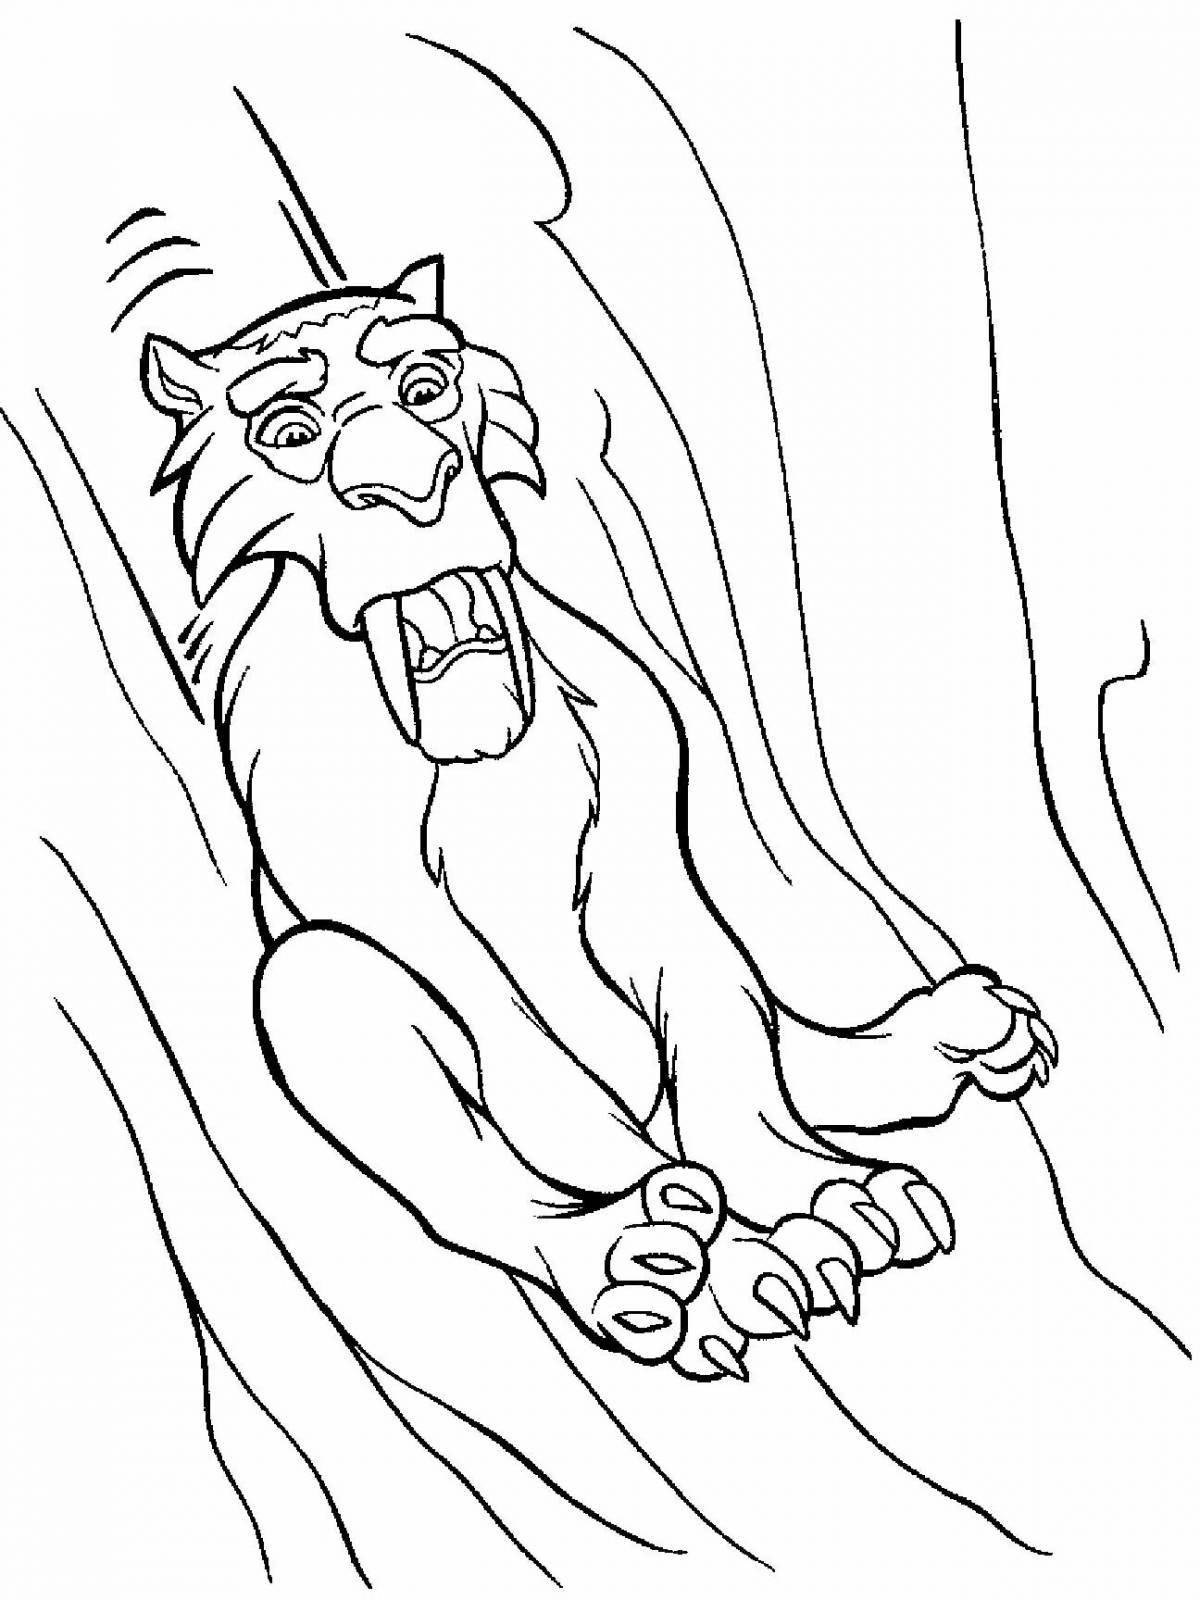 Ice age 4 coloring page